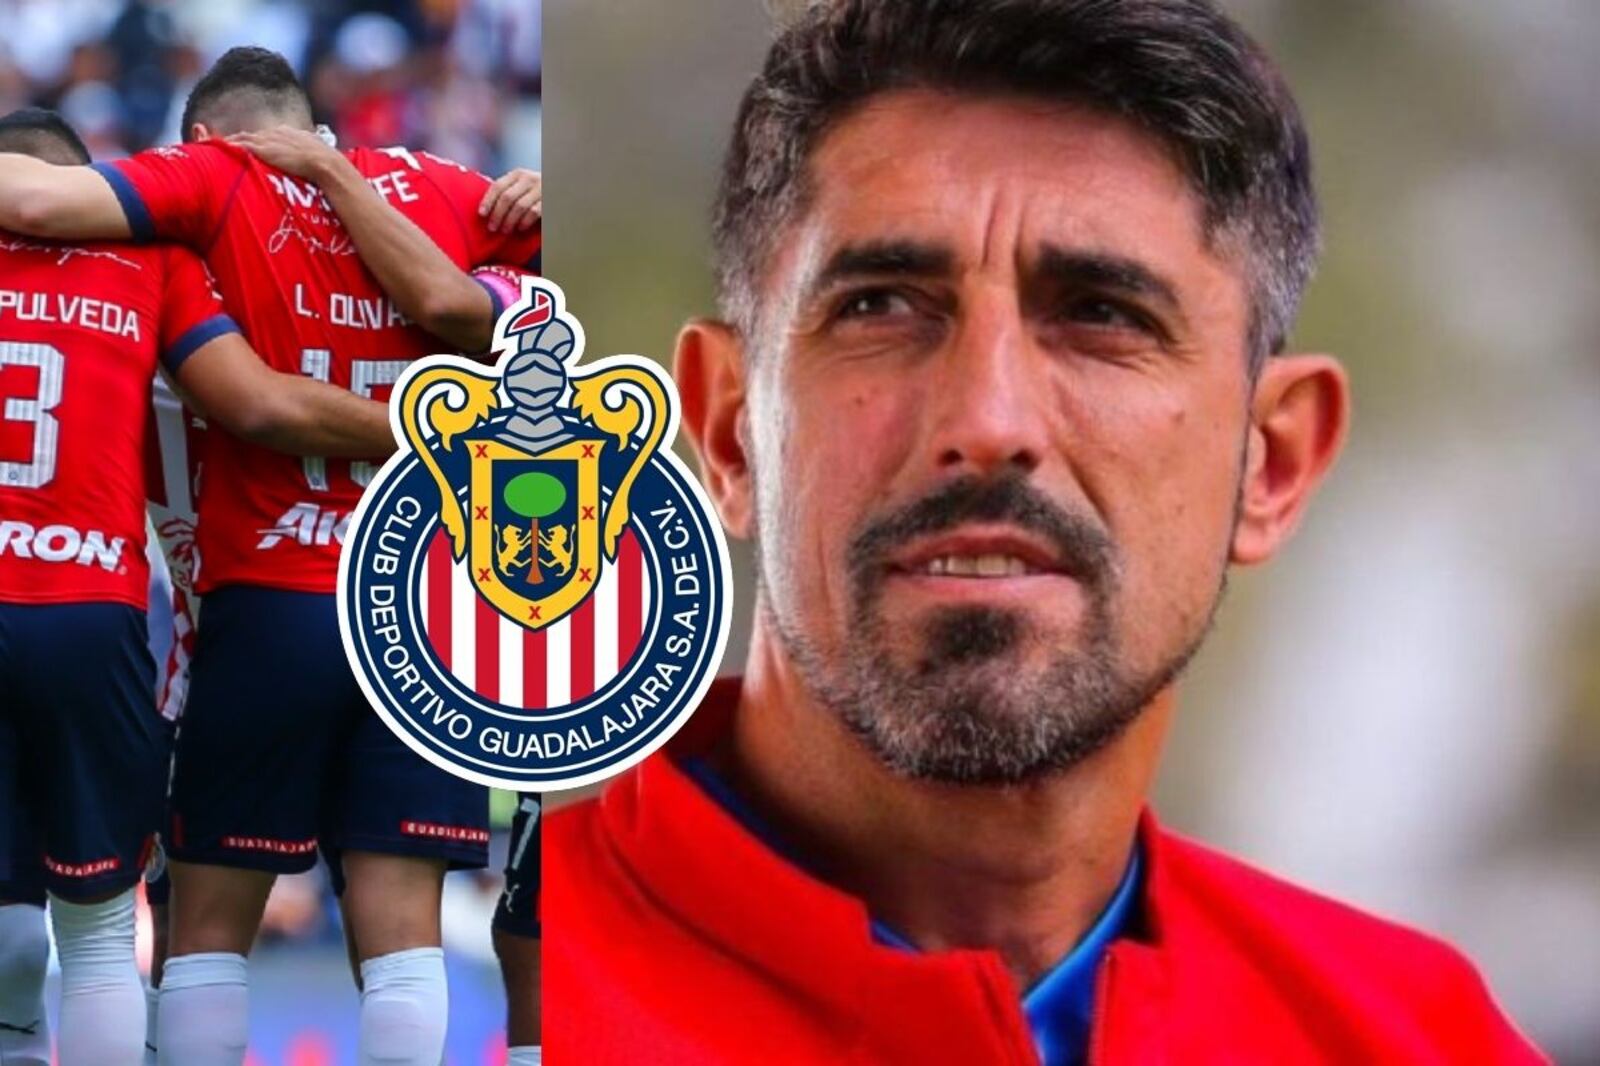 Total disappointment, player to leave Chivas after failure against Athletic Bilbao